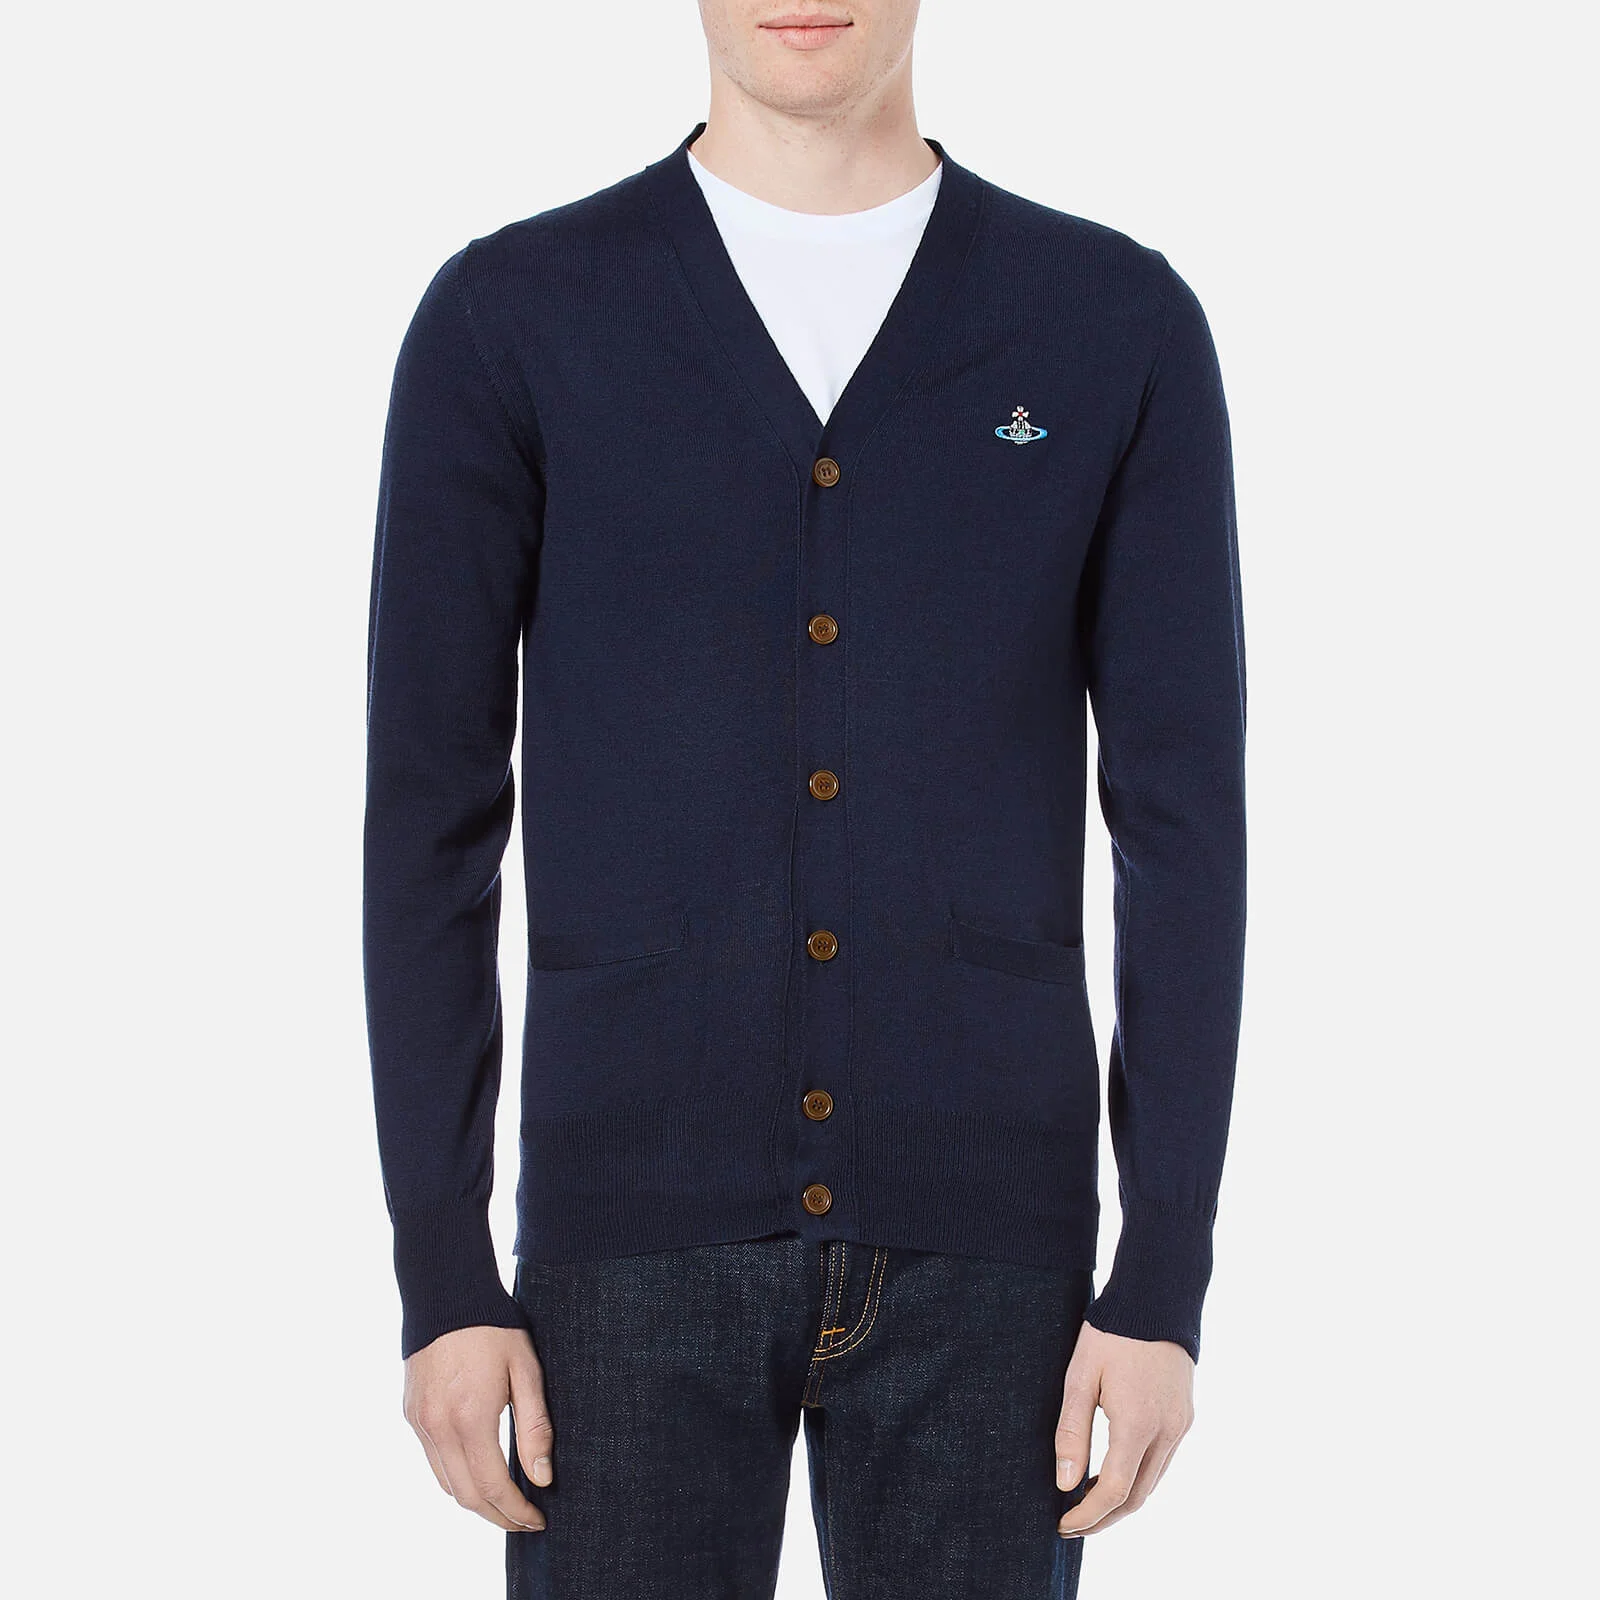 Vivienne Westwood Men's Classic Knitted Cardigan - Navy Image 1